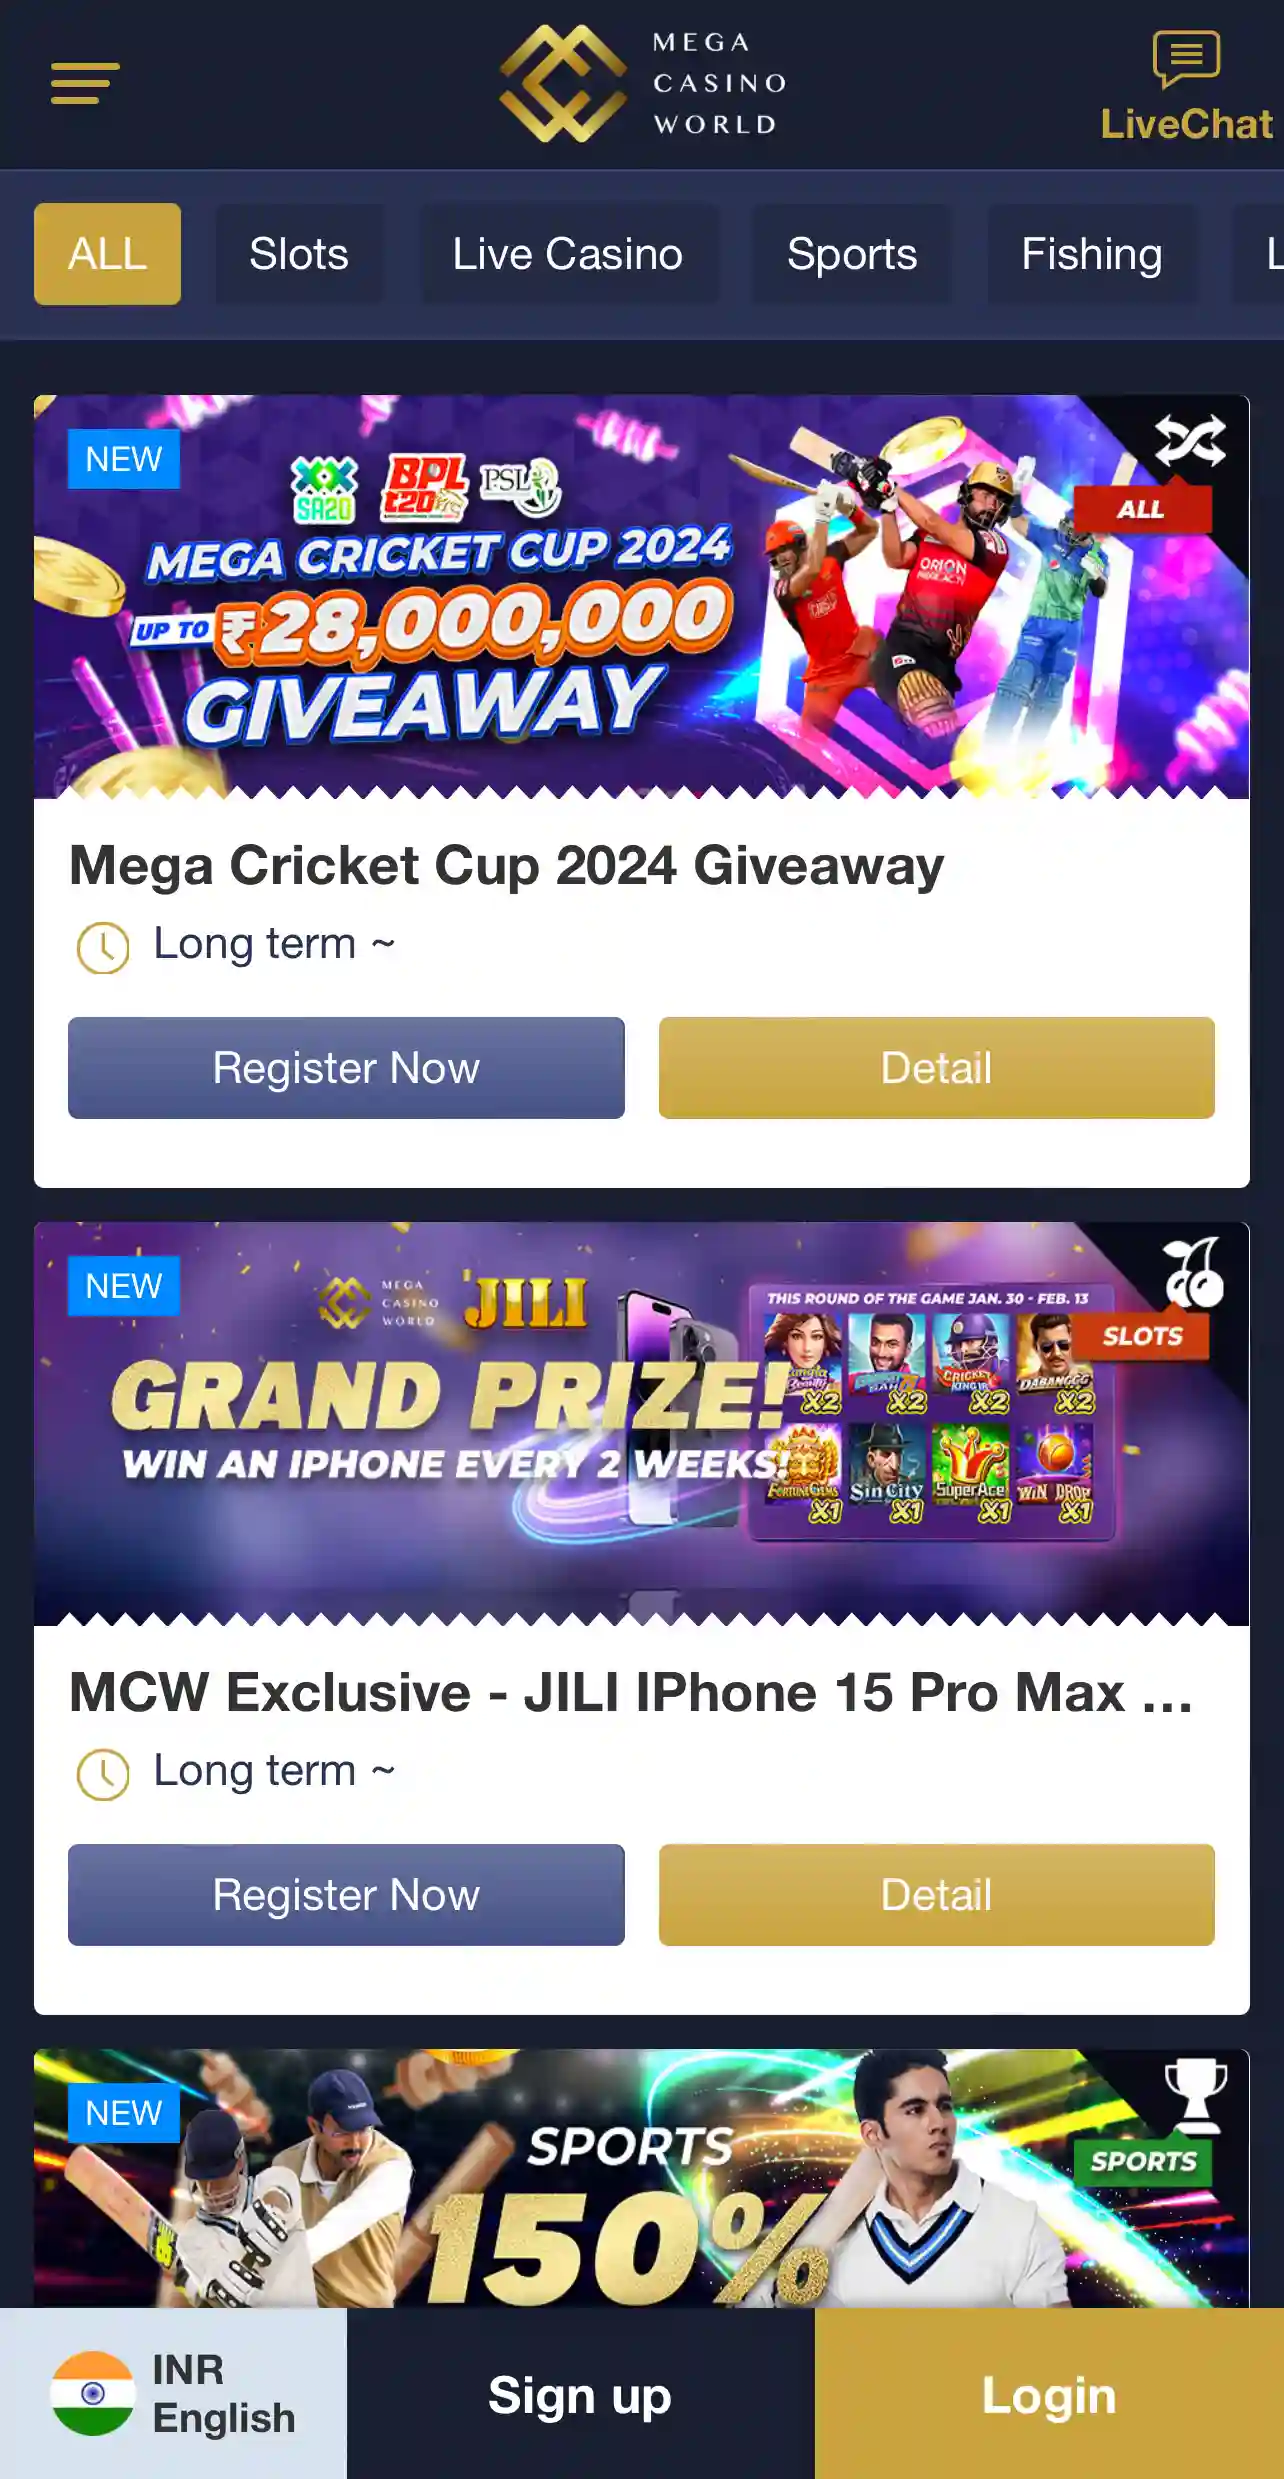 Bonuses and great offers are waiting for you in the Mega Casino World app.